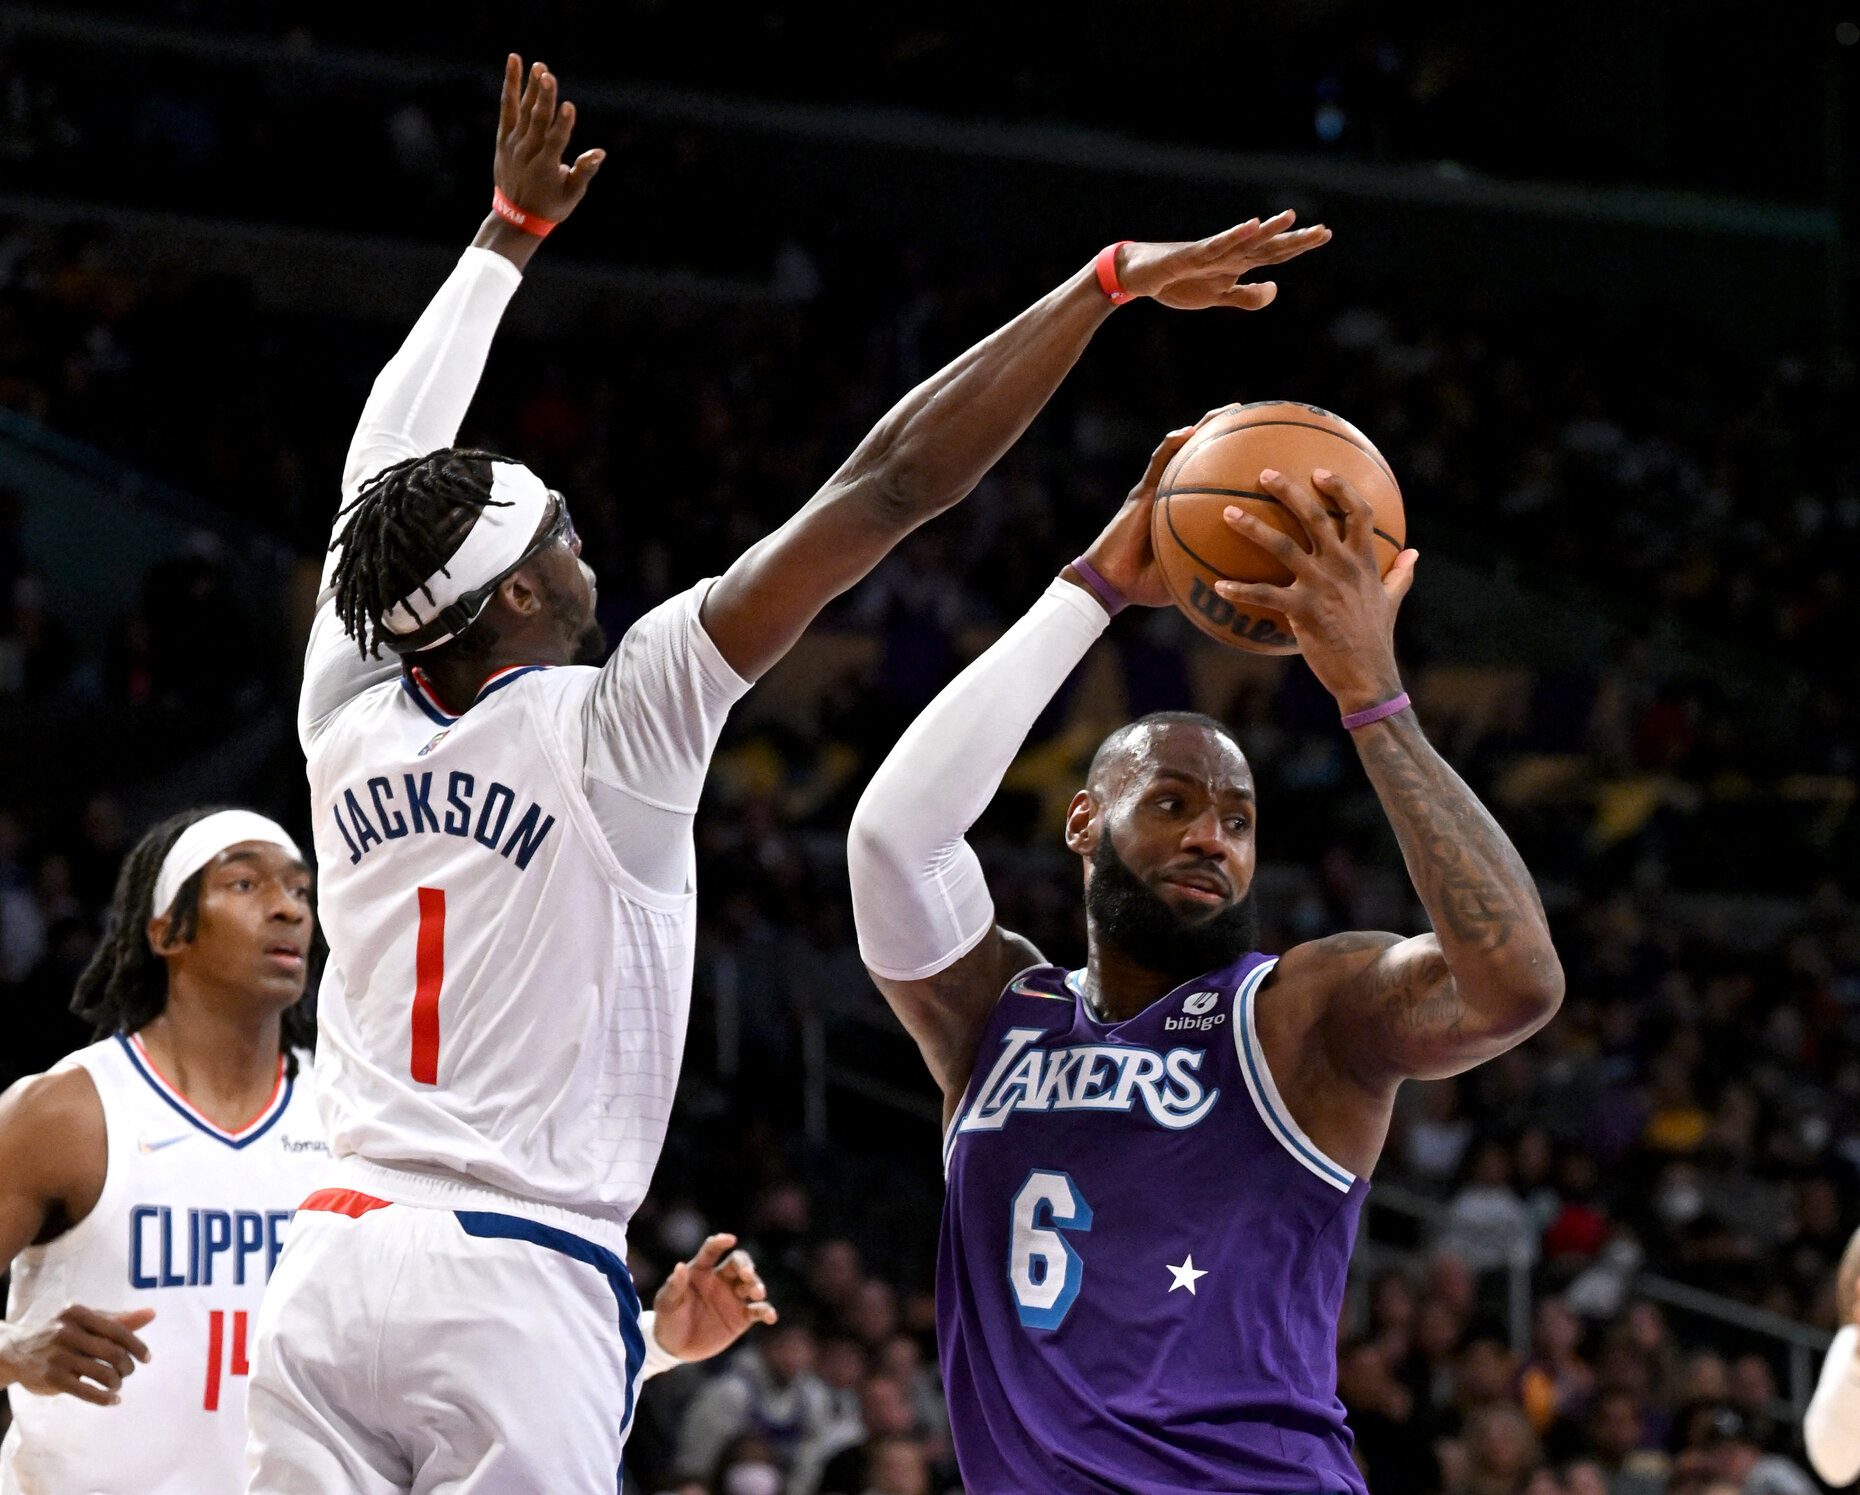 Clippers stun Lakers again in wild finish